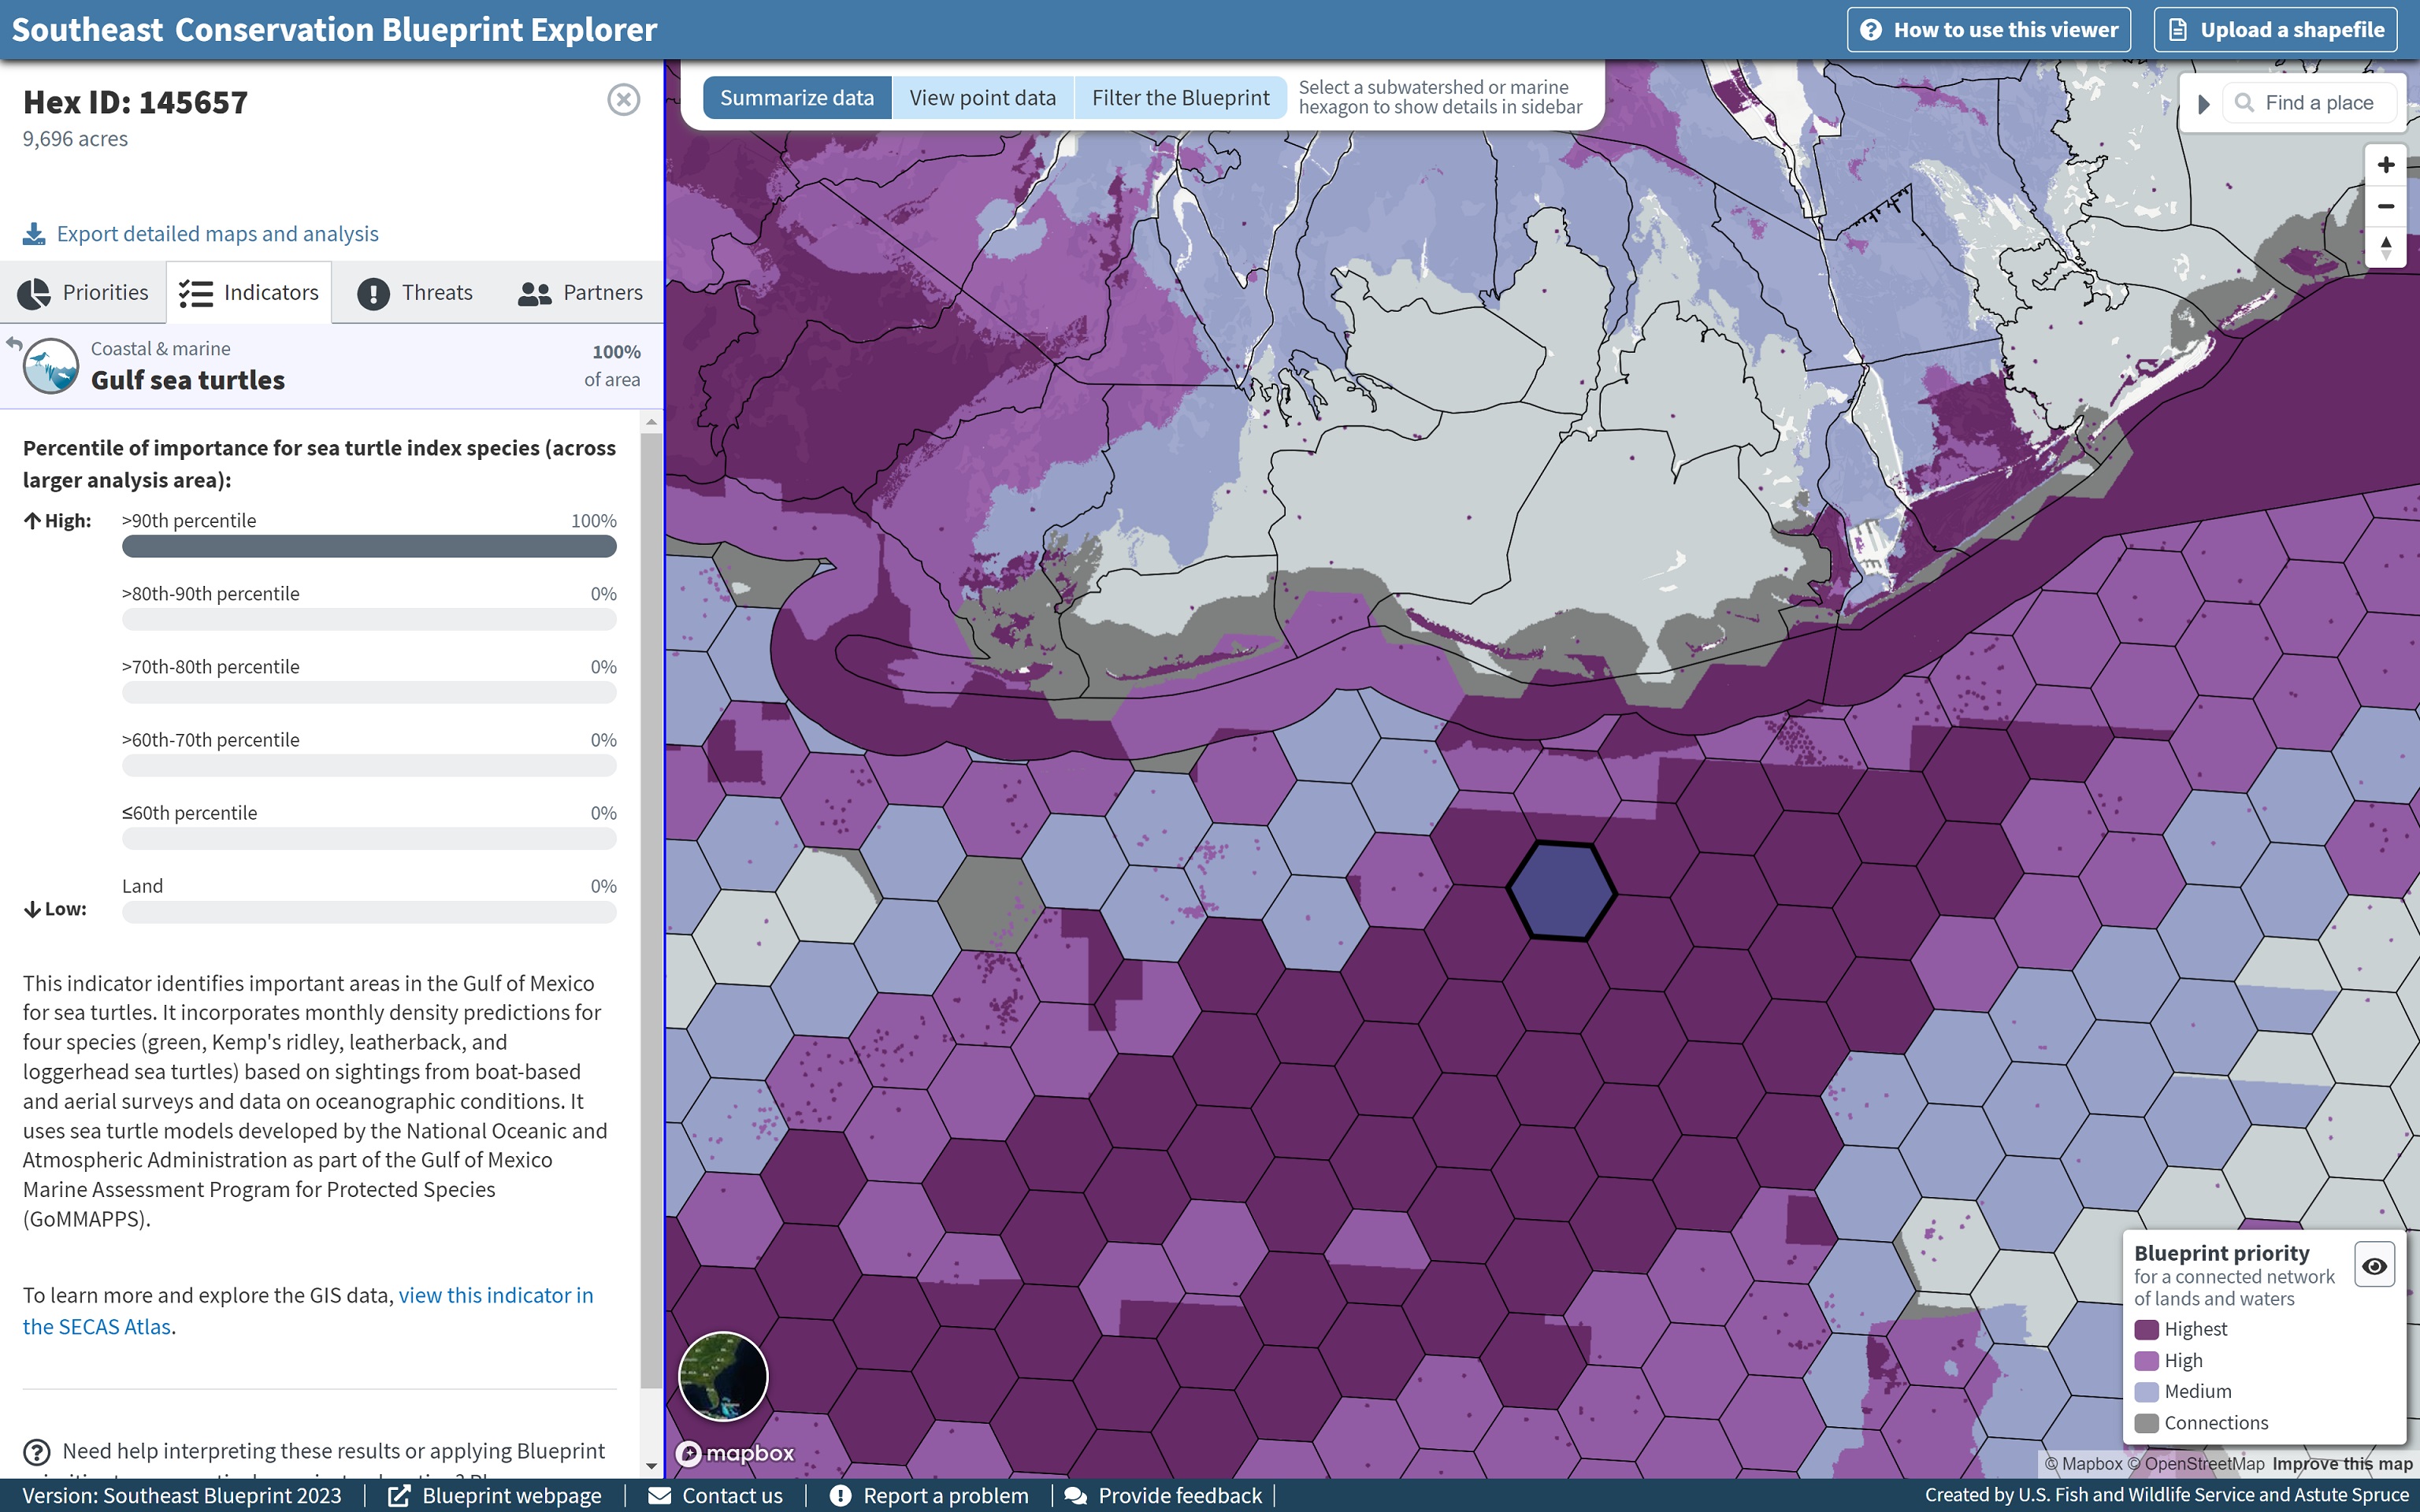 Screenshot of Explorer with marine hexagon selected, showing a map of the Blueprint in shades of purple above a gray basemap, and a sidebar on the left indicating that 100% of the hexagon receives the highest score on the Gulf sea turtles indicator